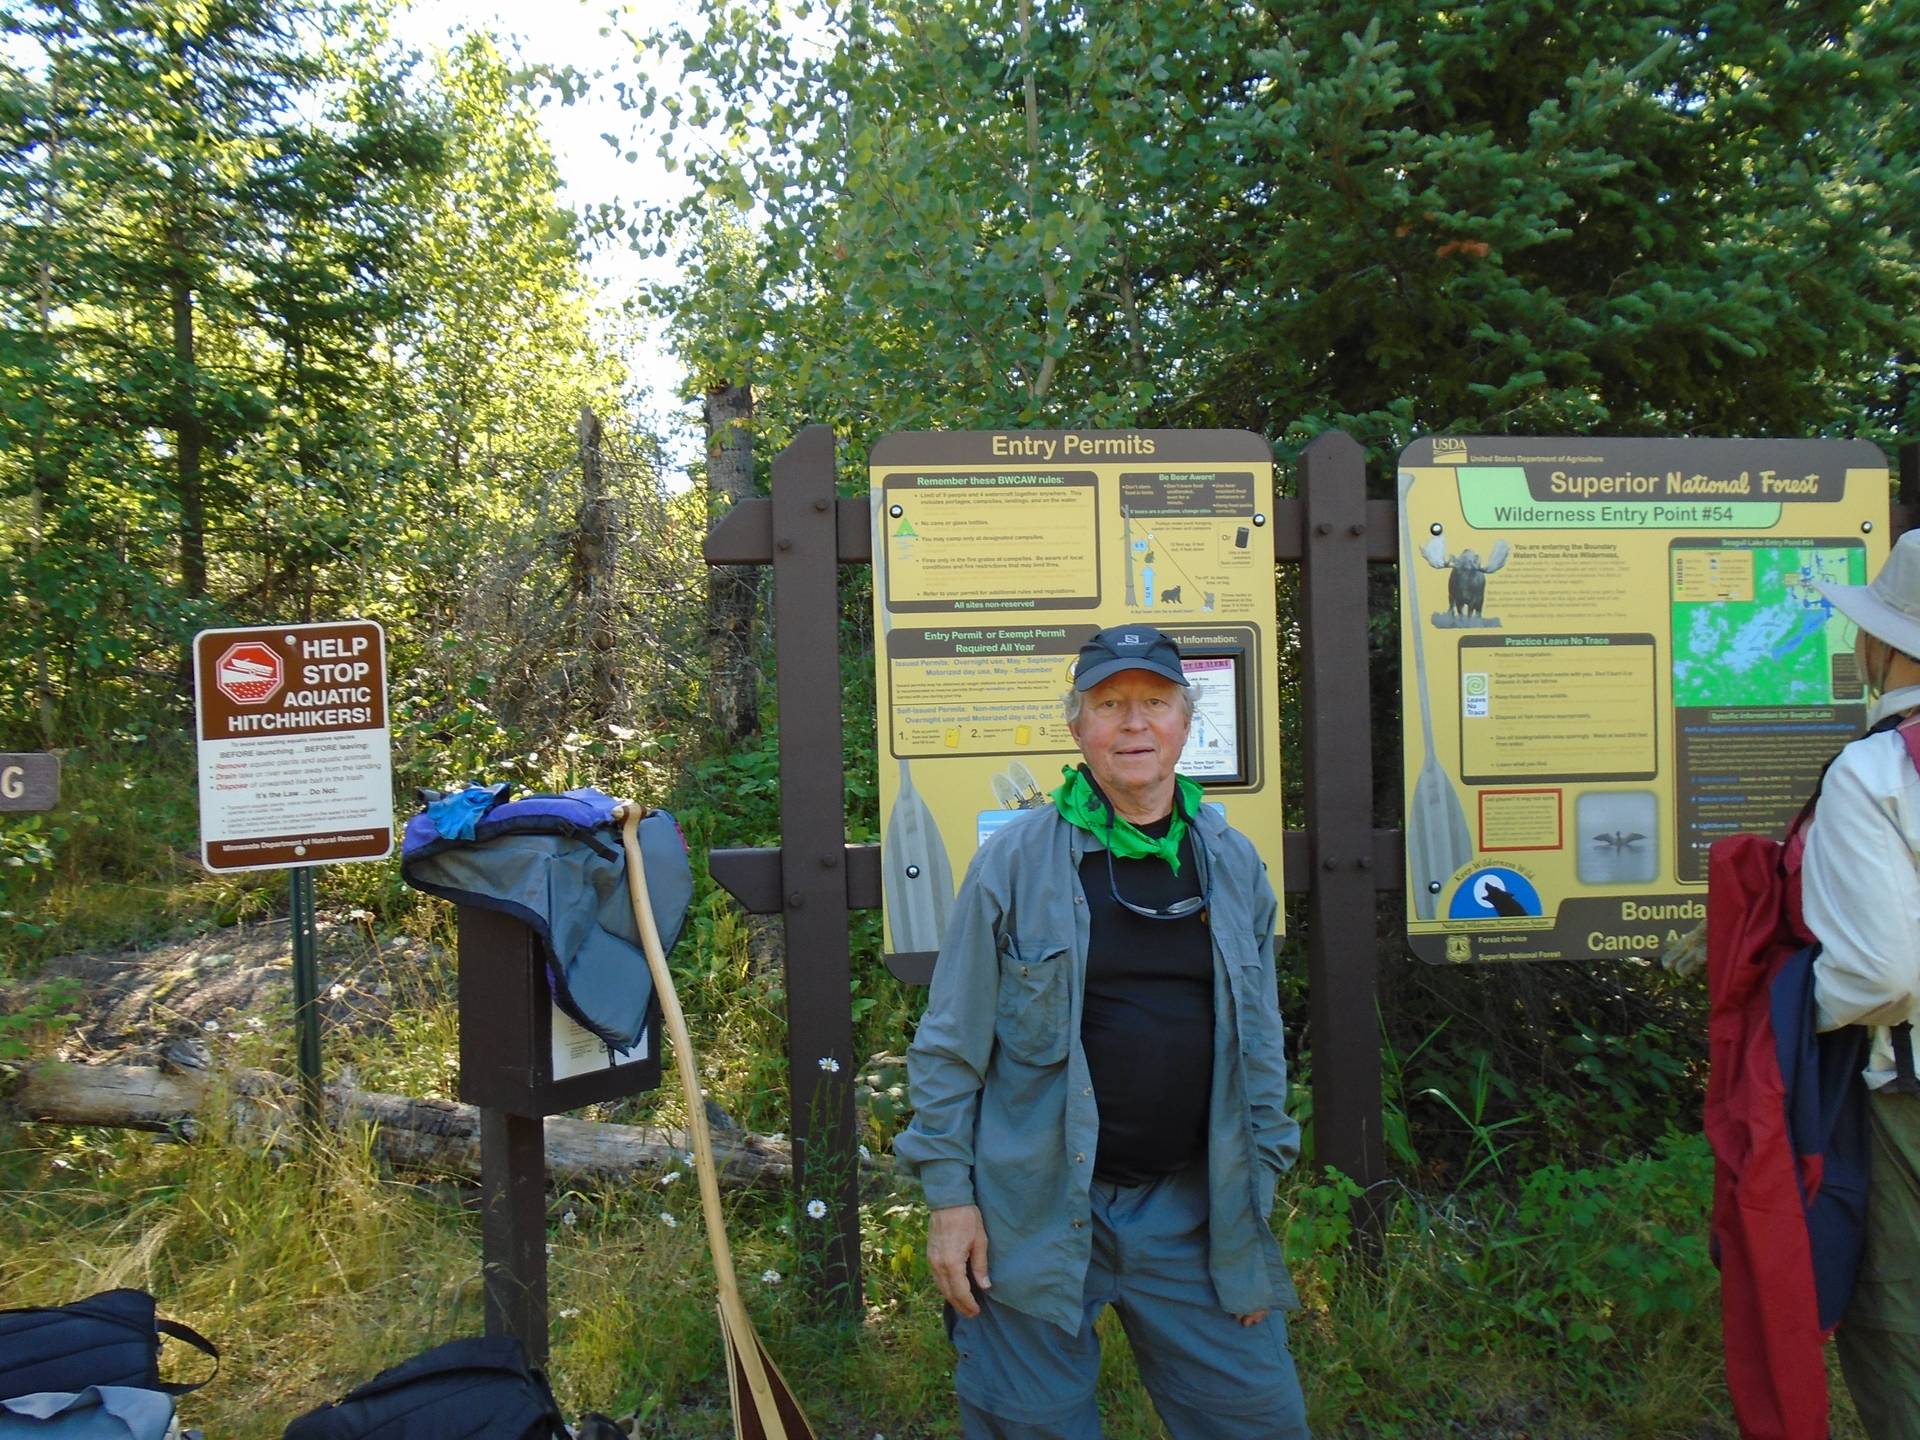 Contemporary photo of an older gentleman stopped at a trail head in the wilderness.